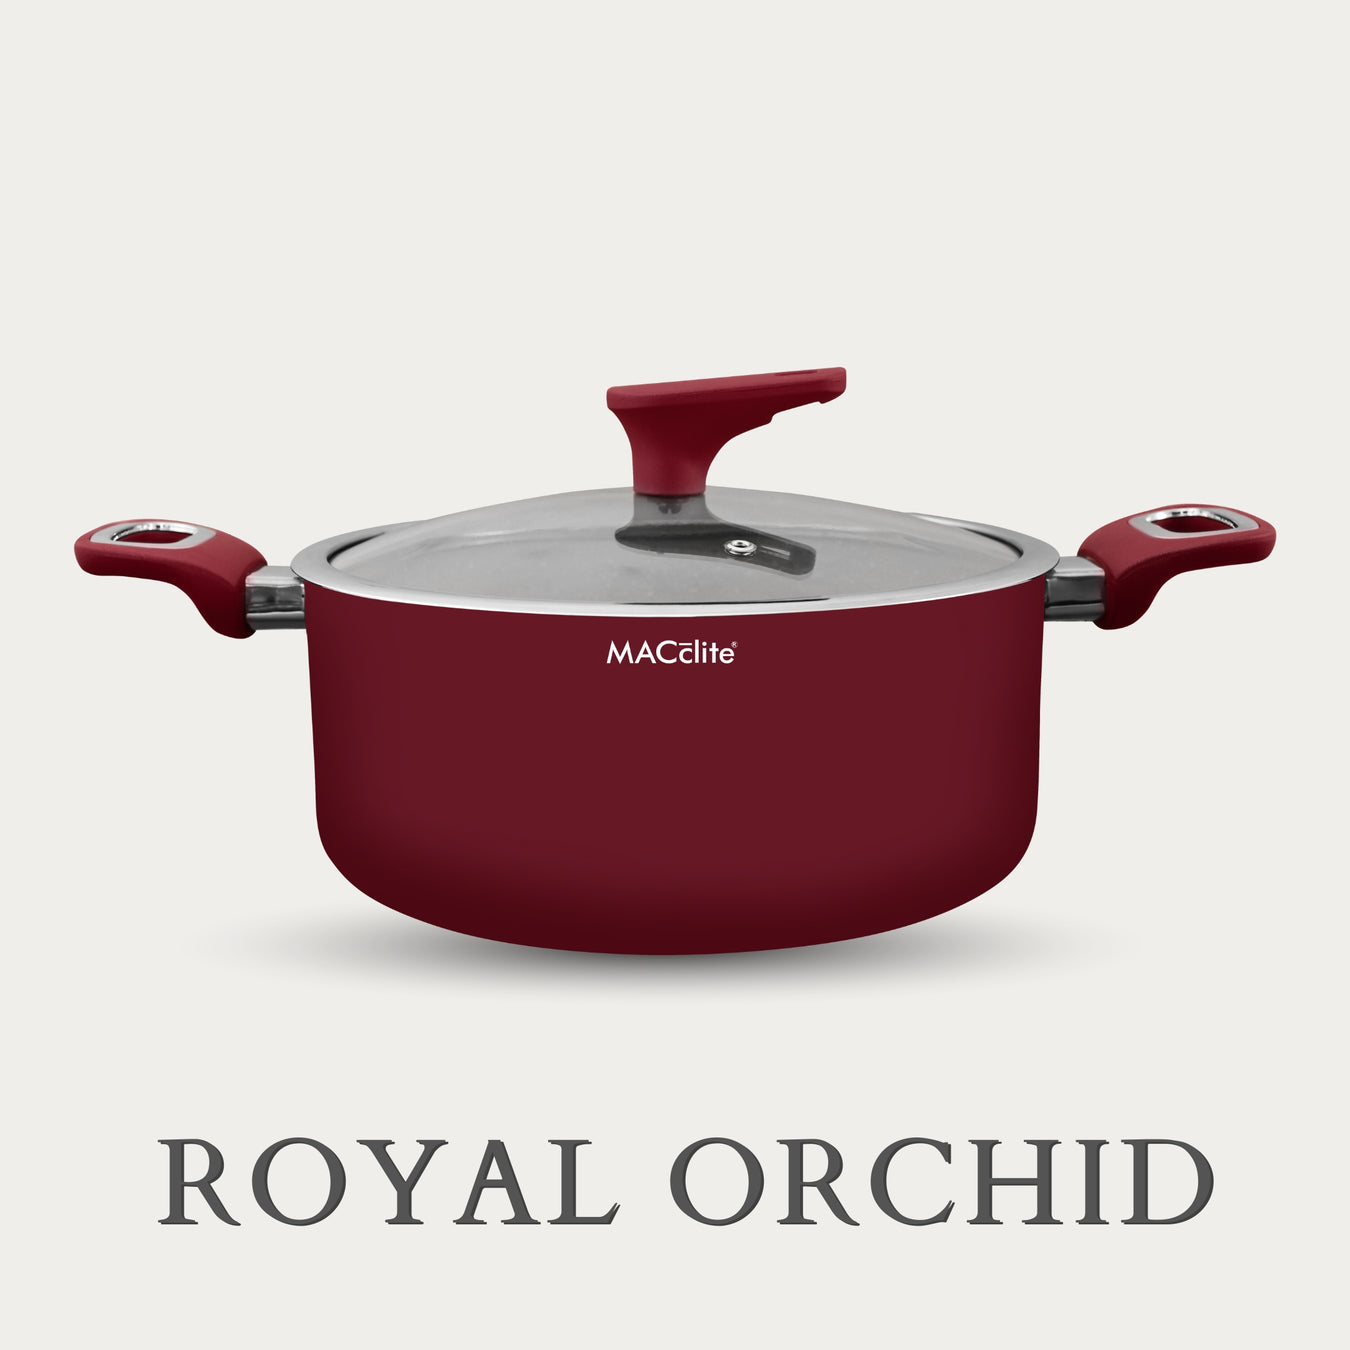 Royal Orchid Cookware